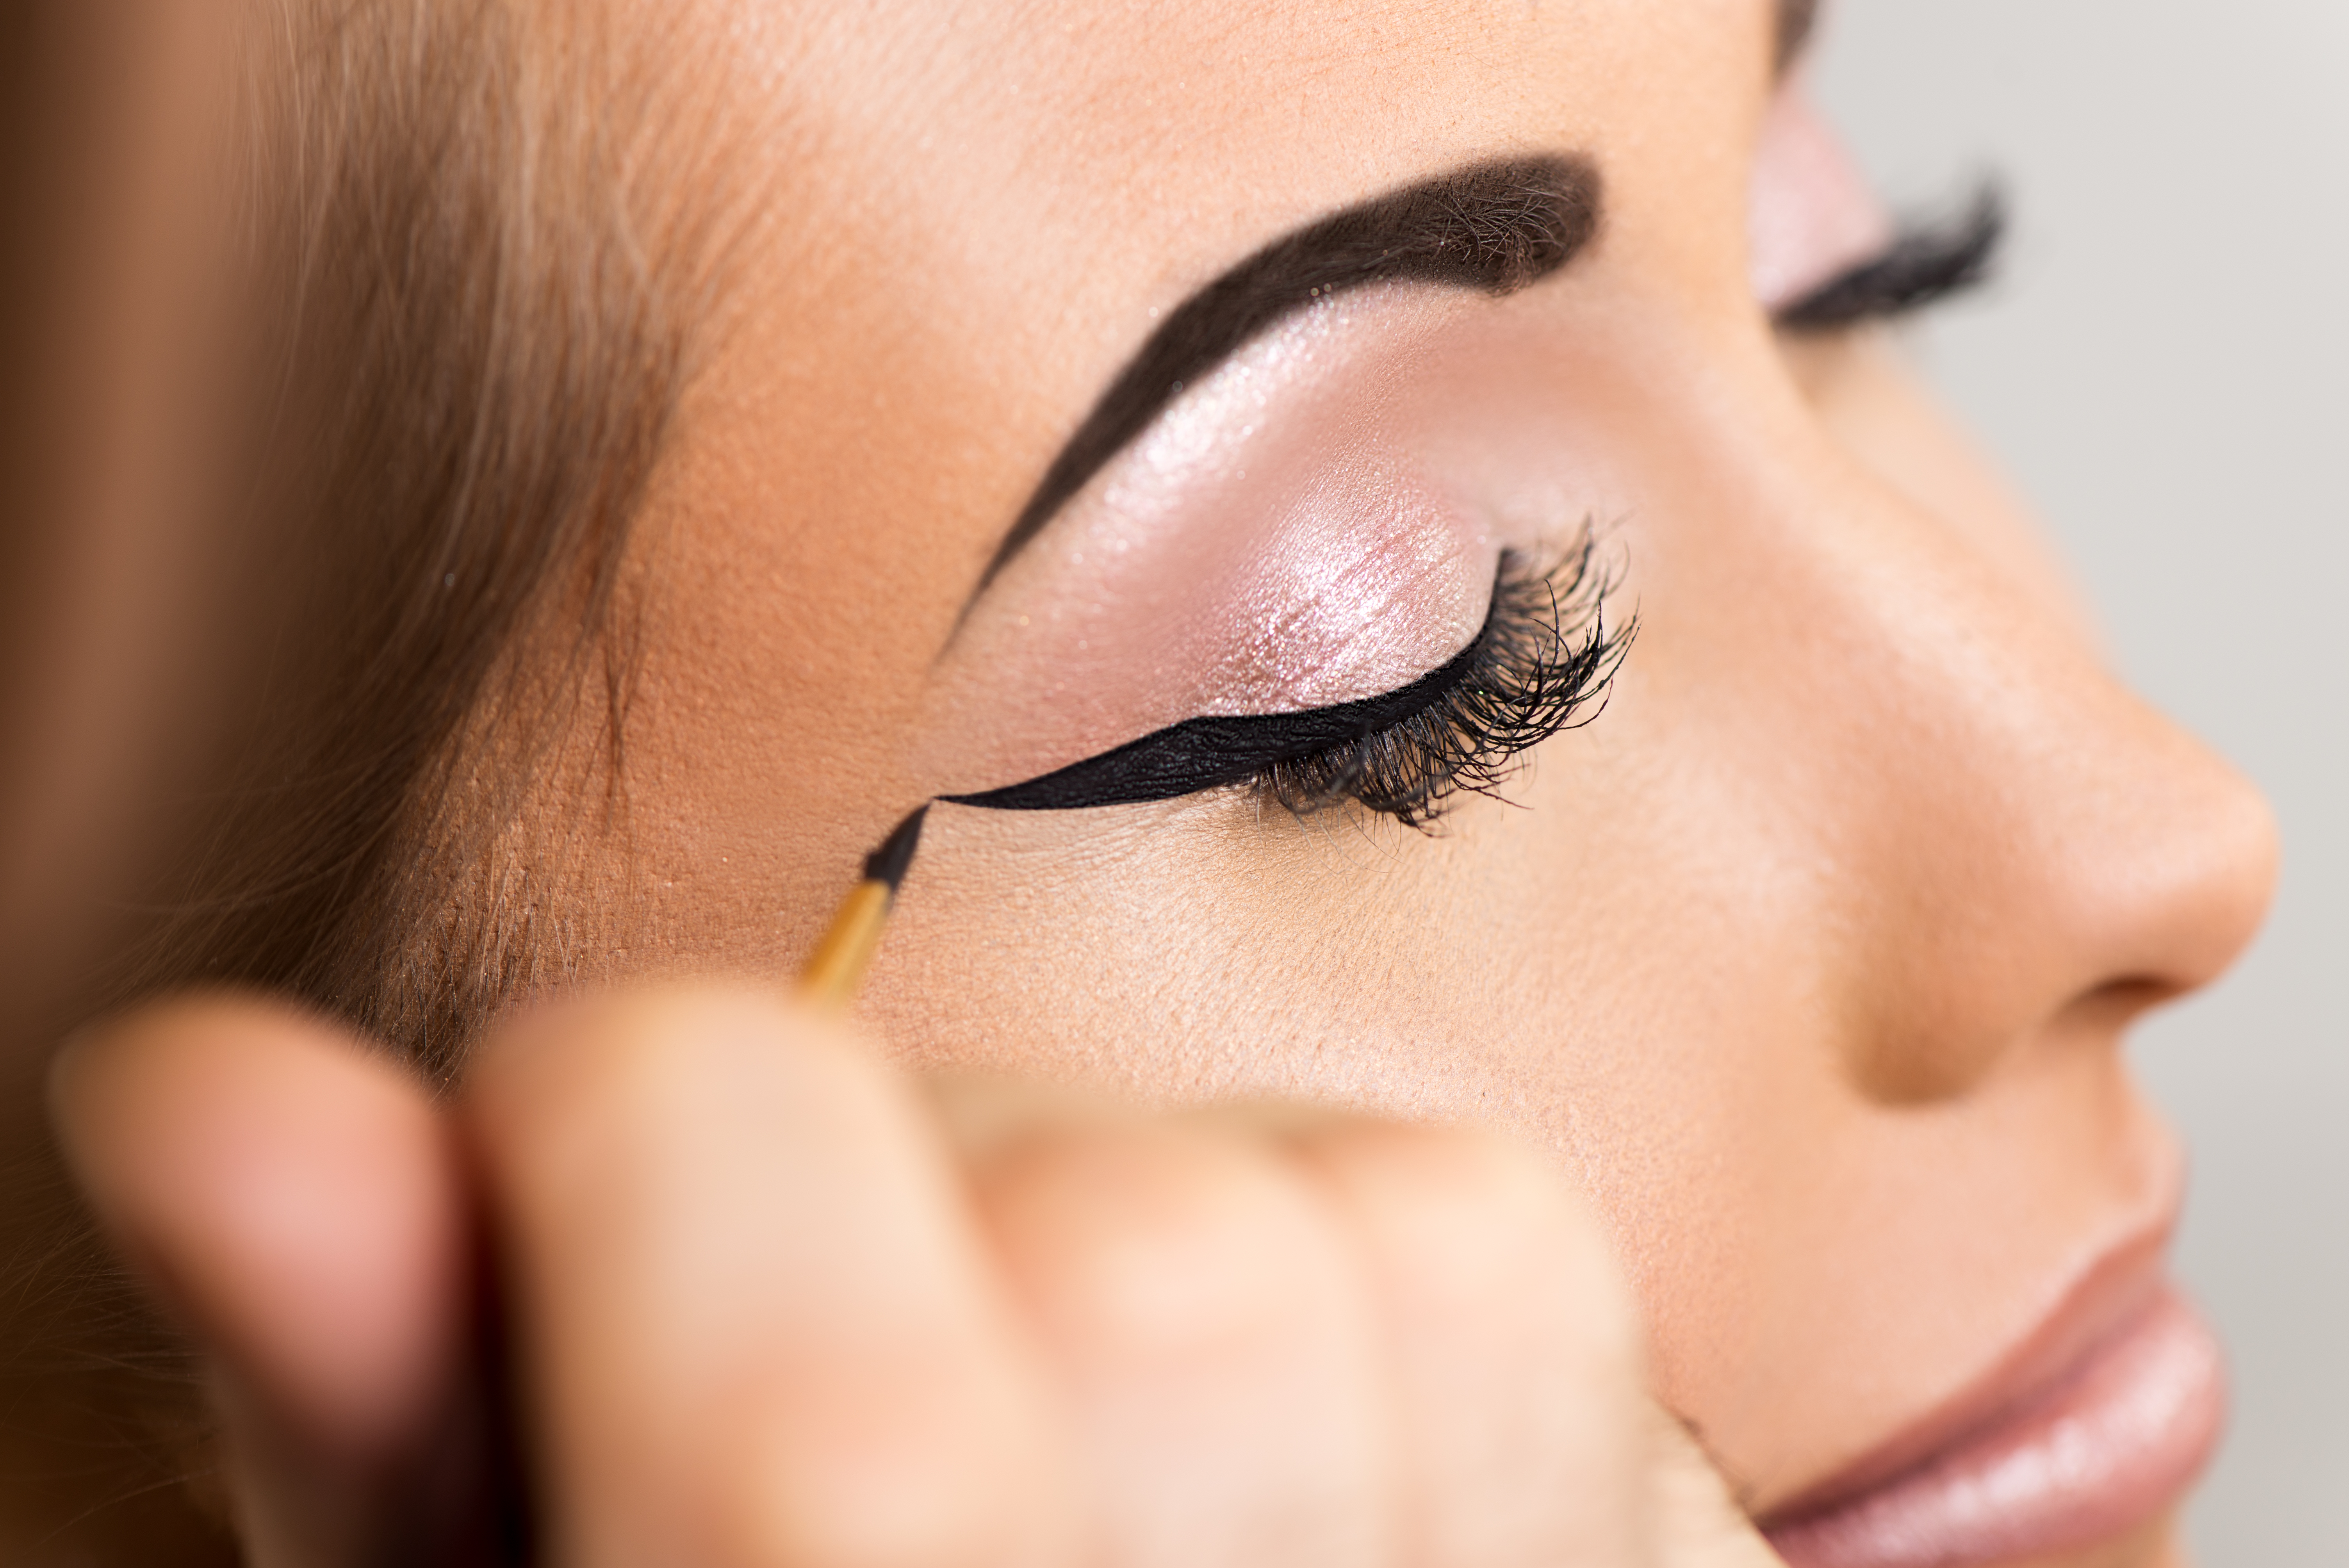 What You Should Know About The New Eyeliner Tattoo Trend